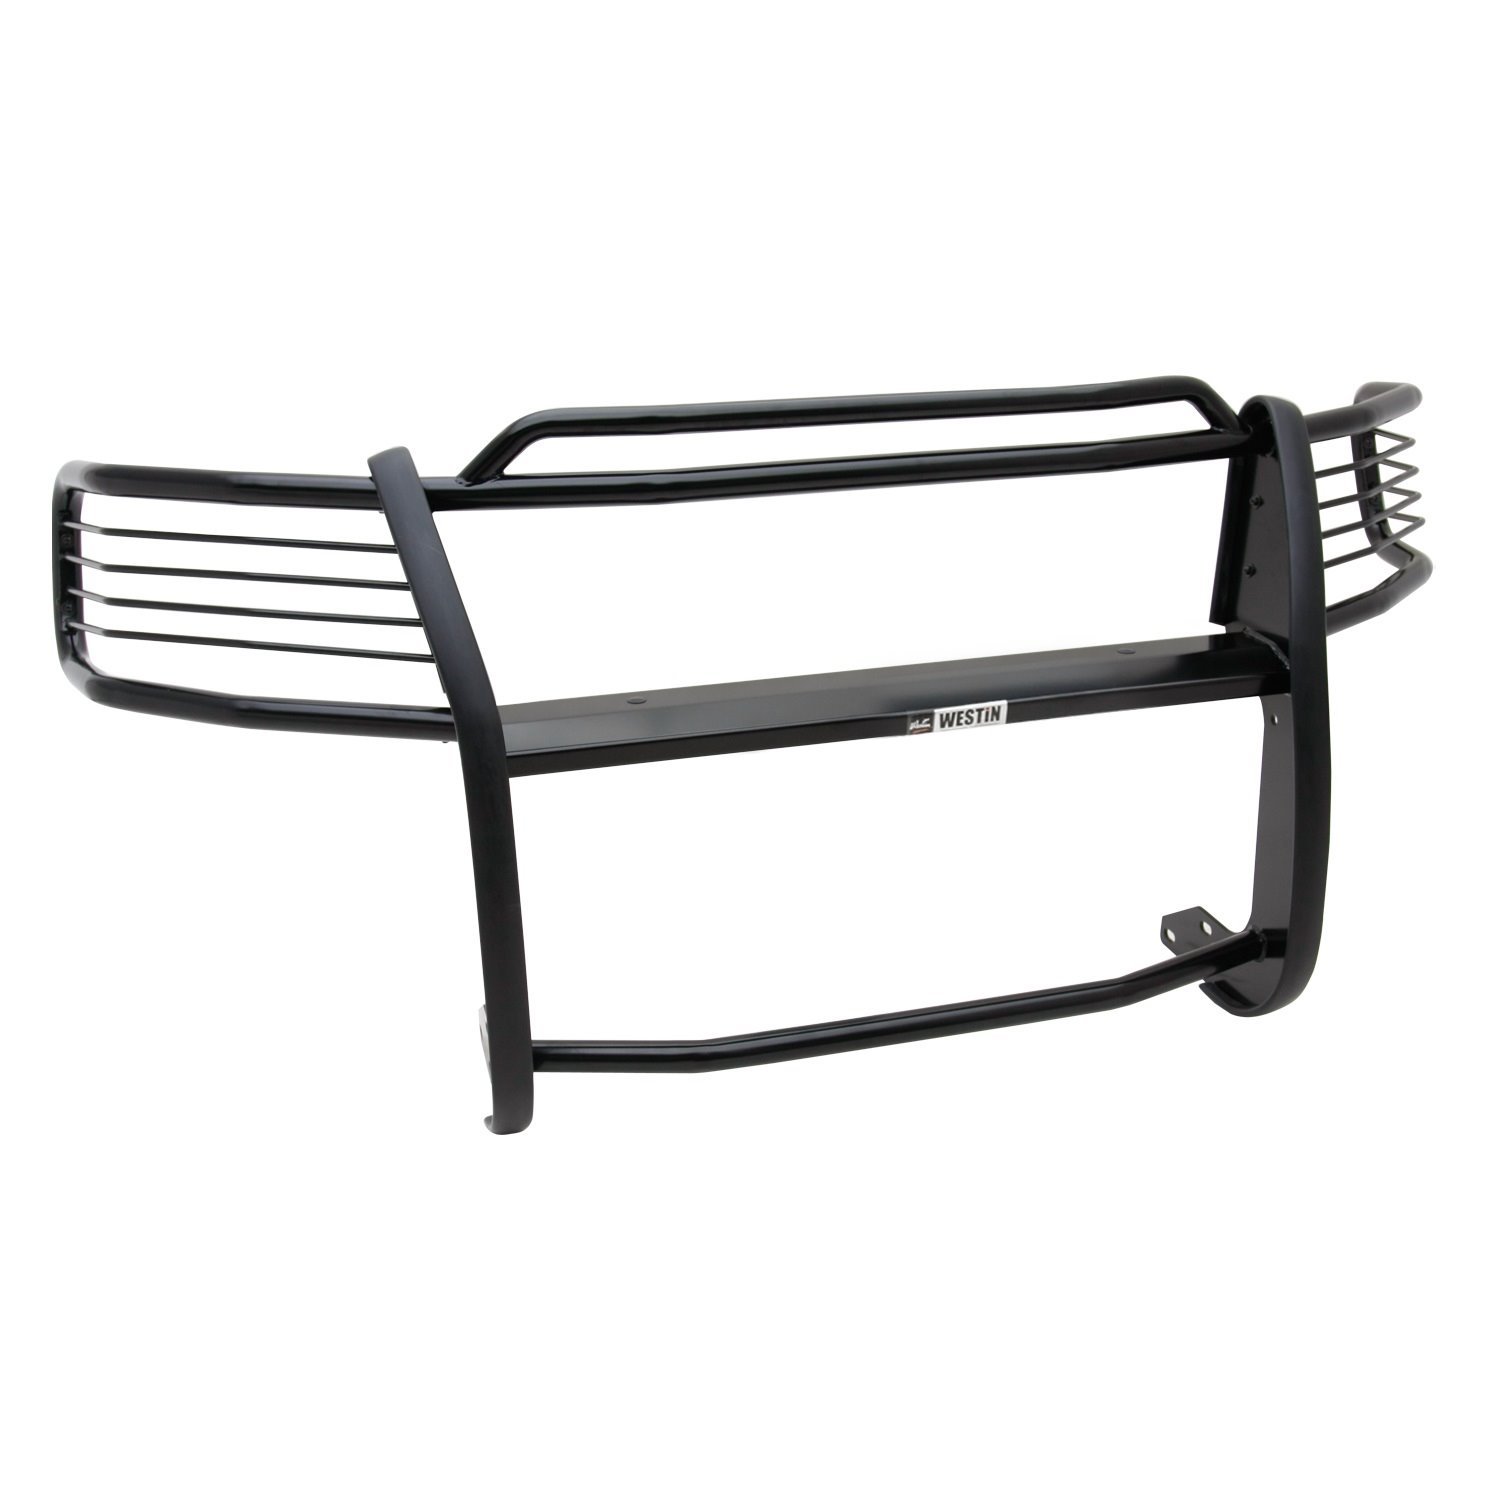 Sportsman Grille Guard 1997-2002 Ford Expedition 4WD